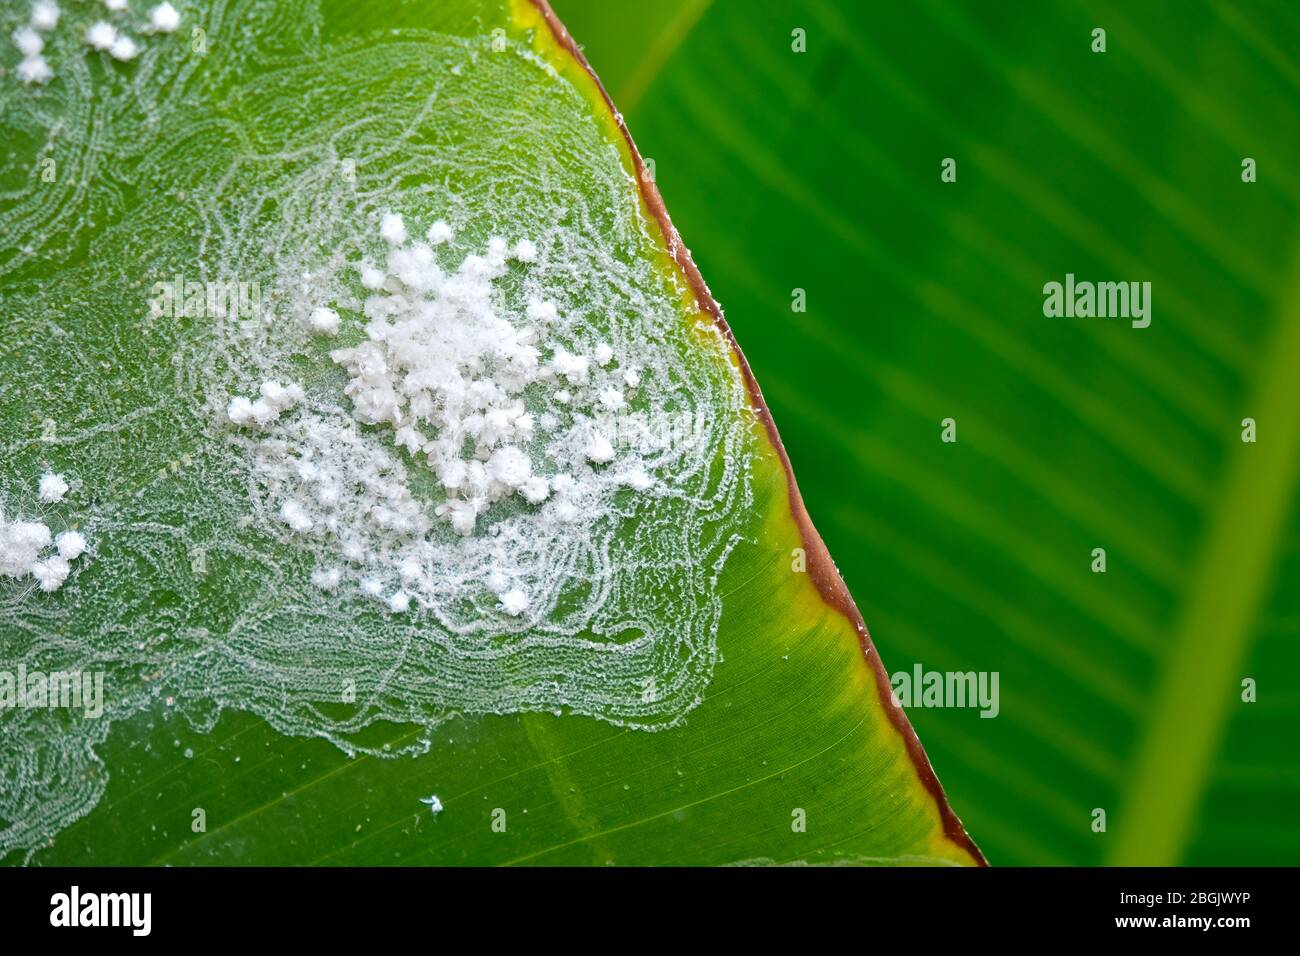 Plant leaf with a colony of insects, woolly aphids (Eriosomatinae), banana plant leaves. Stock Photo